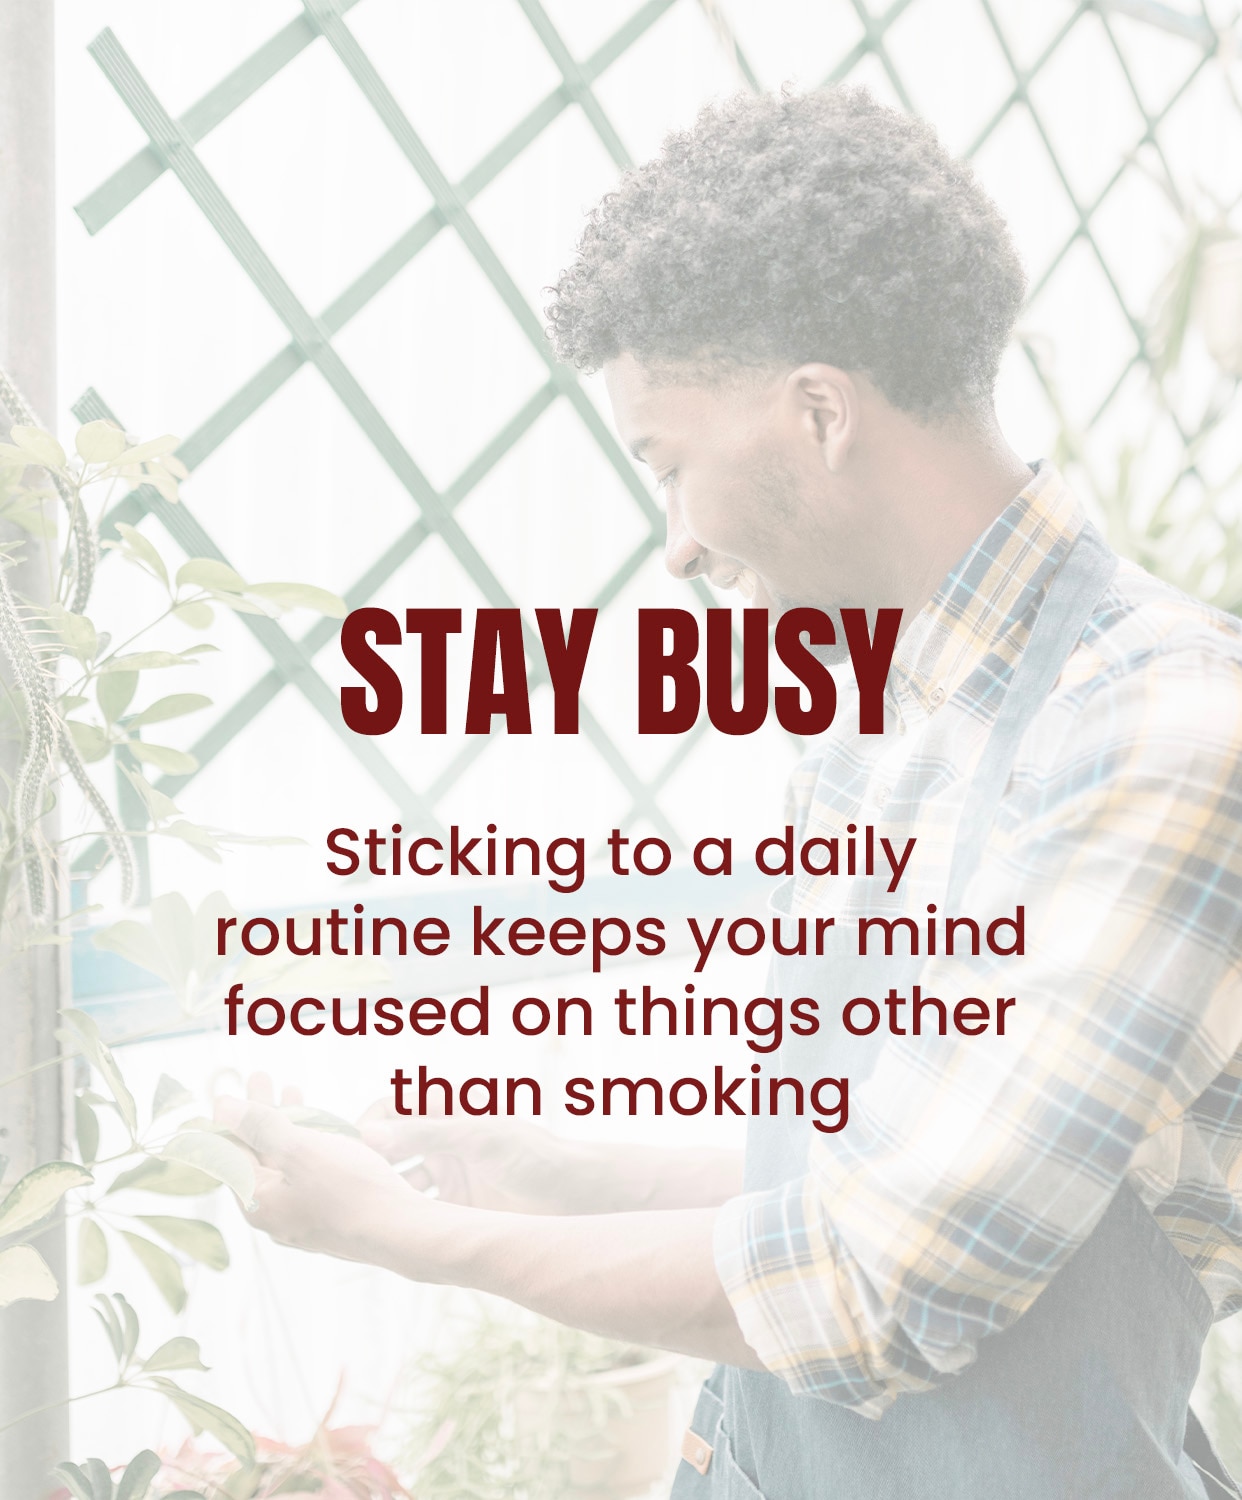 Stay busy by watering plants on a schedule to take your mind off smoking.